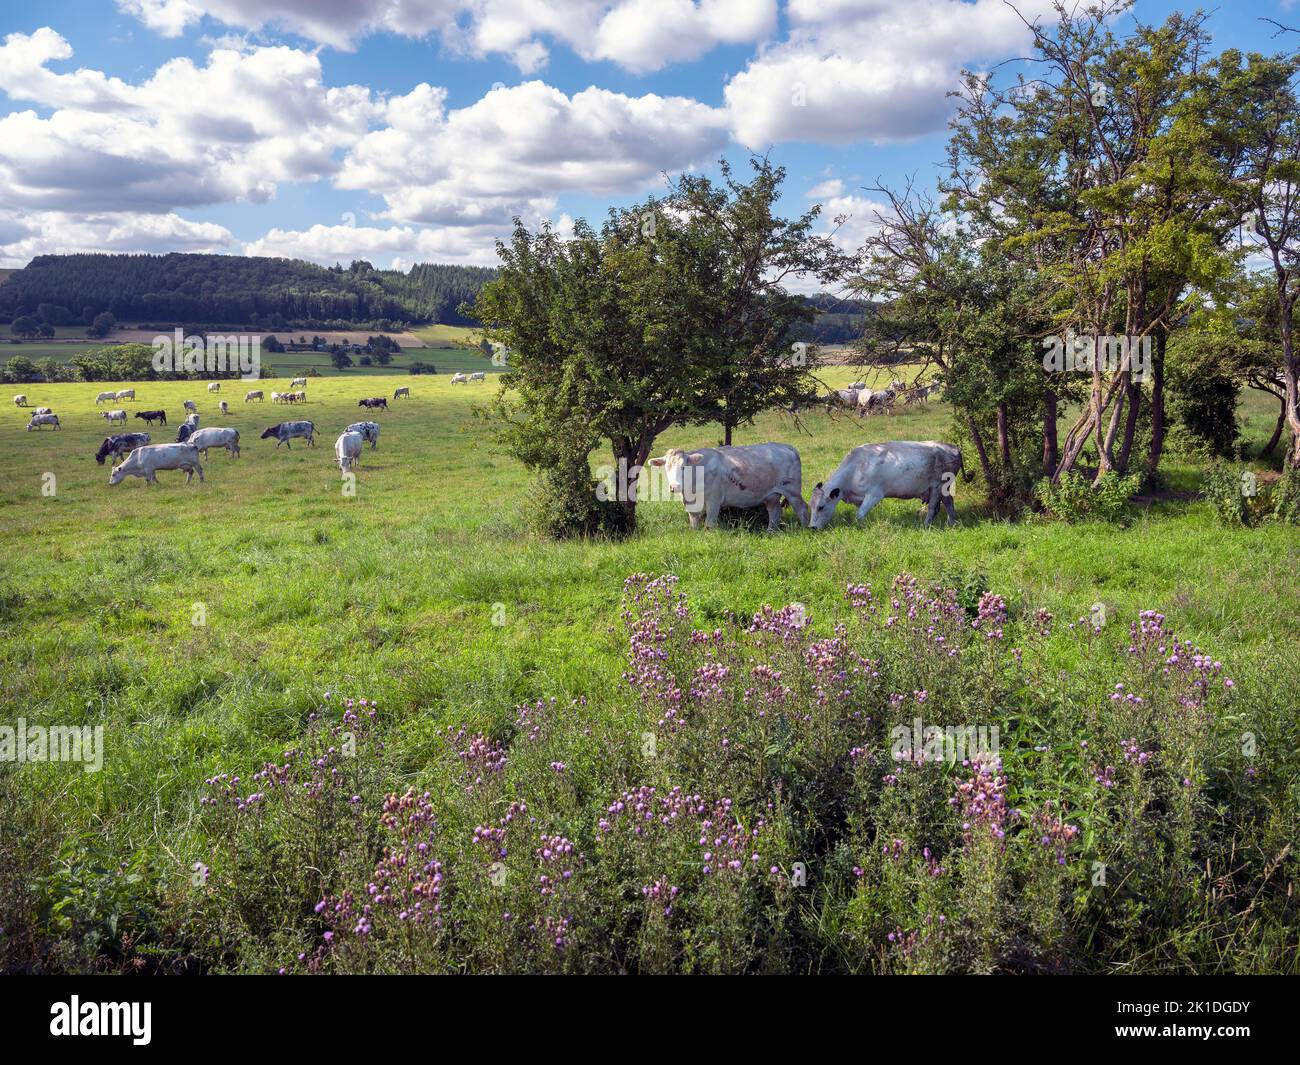 cows graze near thistles in green grassy summer landscape near Han sur Lesse and Rochefort in belgian ardennes area Stock Photo